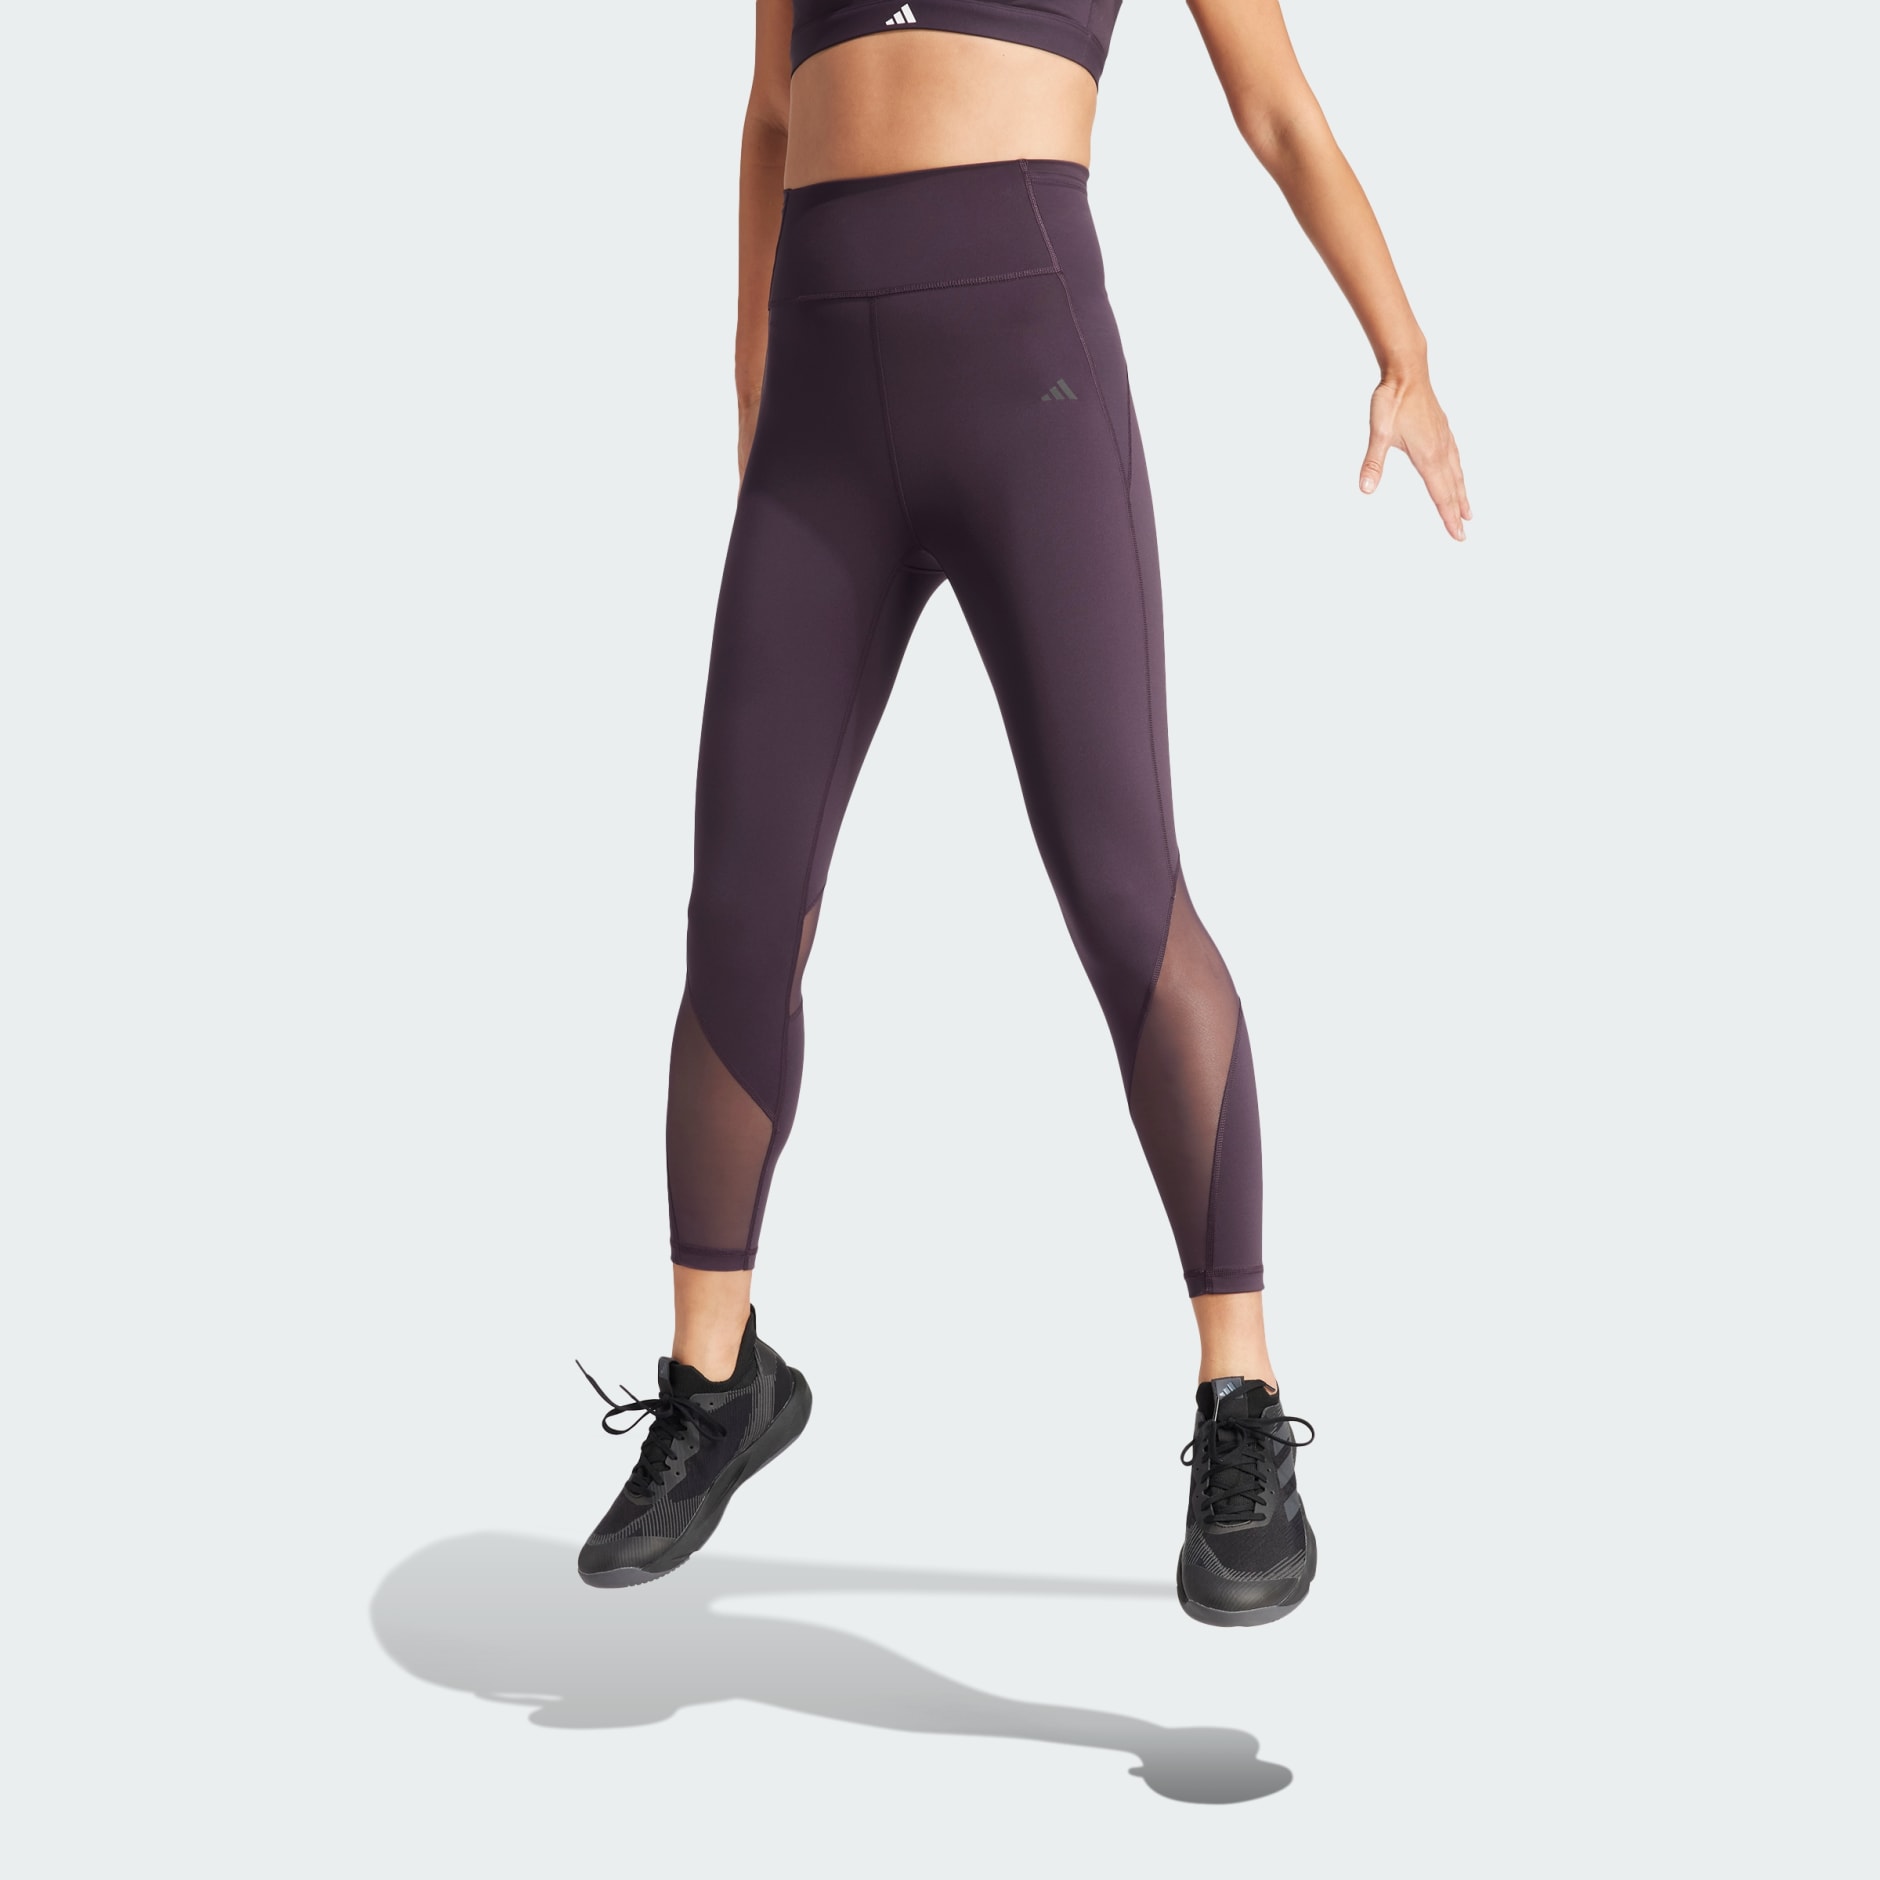 Adidas says it can period-proof your activewear | Vogue Business